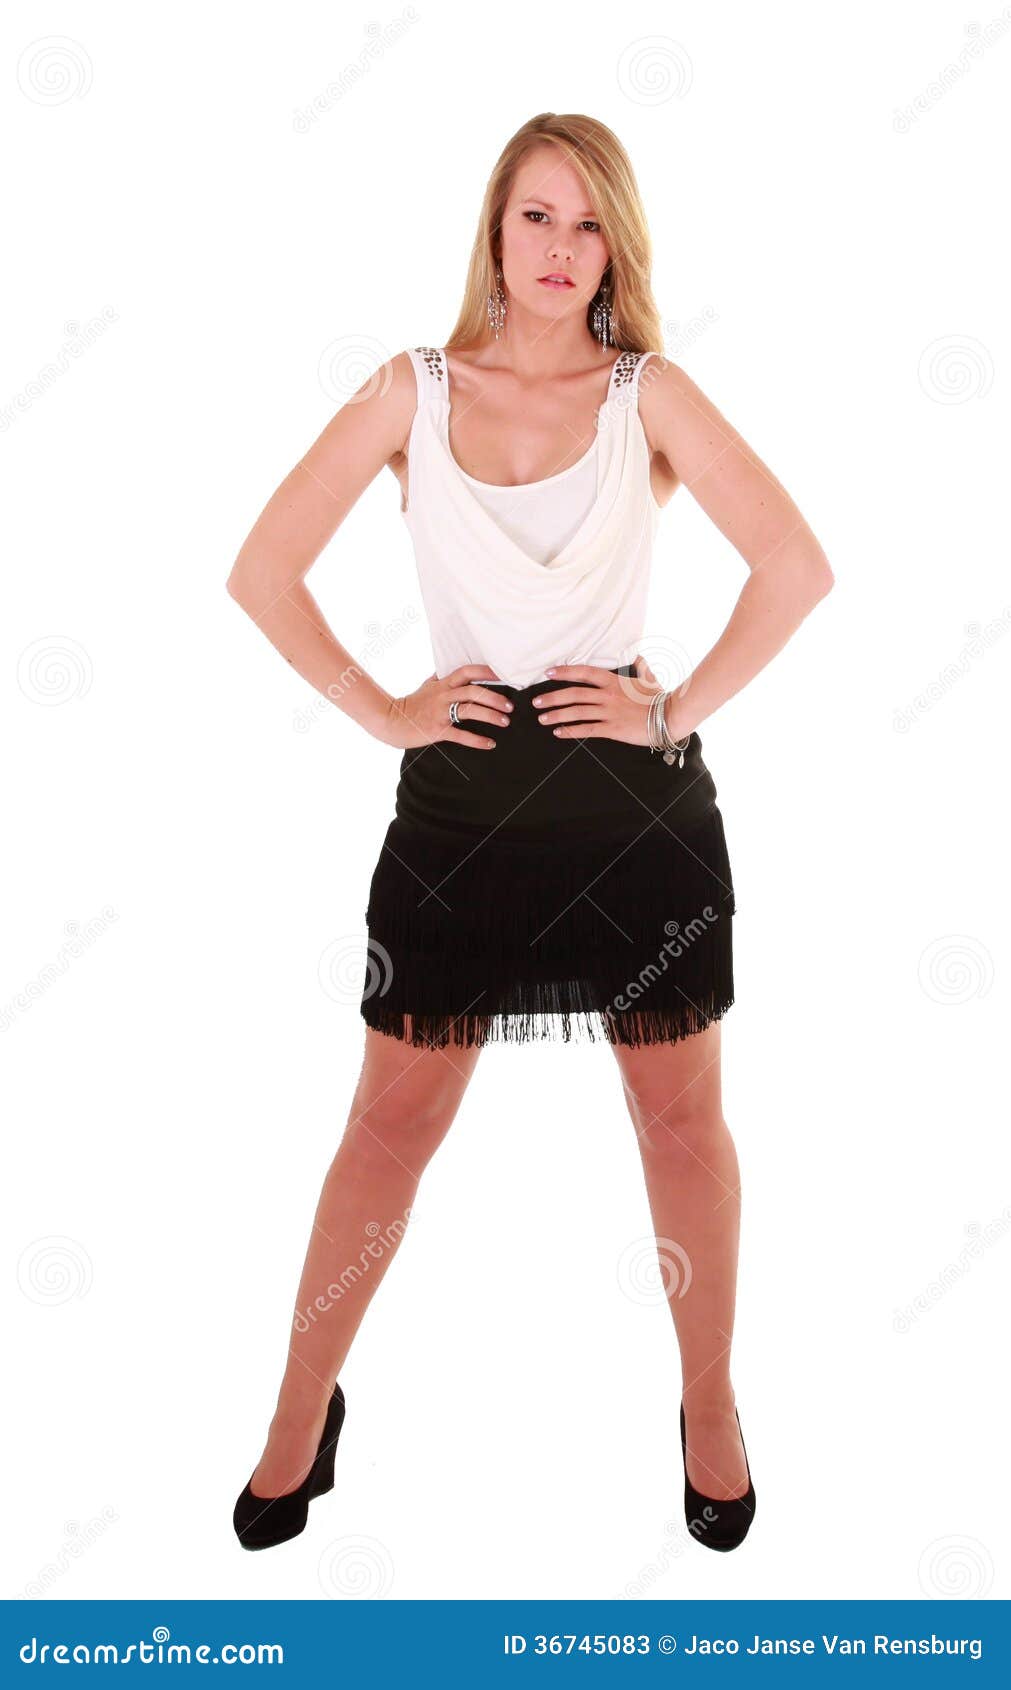 Blonde Woman in Black Skirt and White Top Stock Image - Image of ...